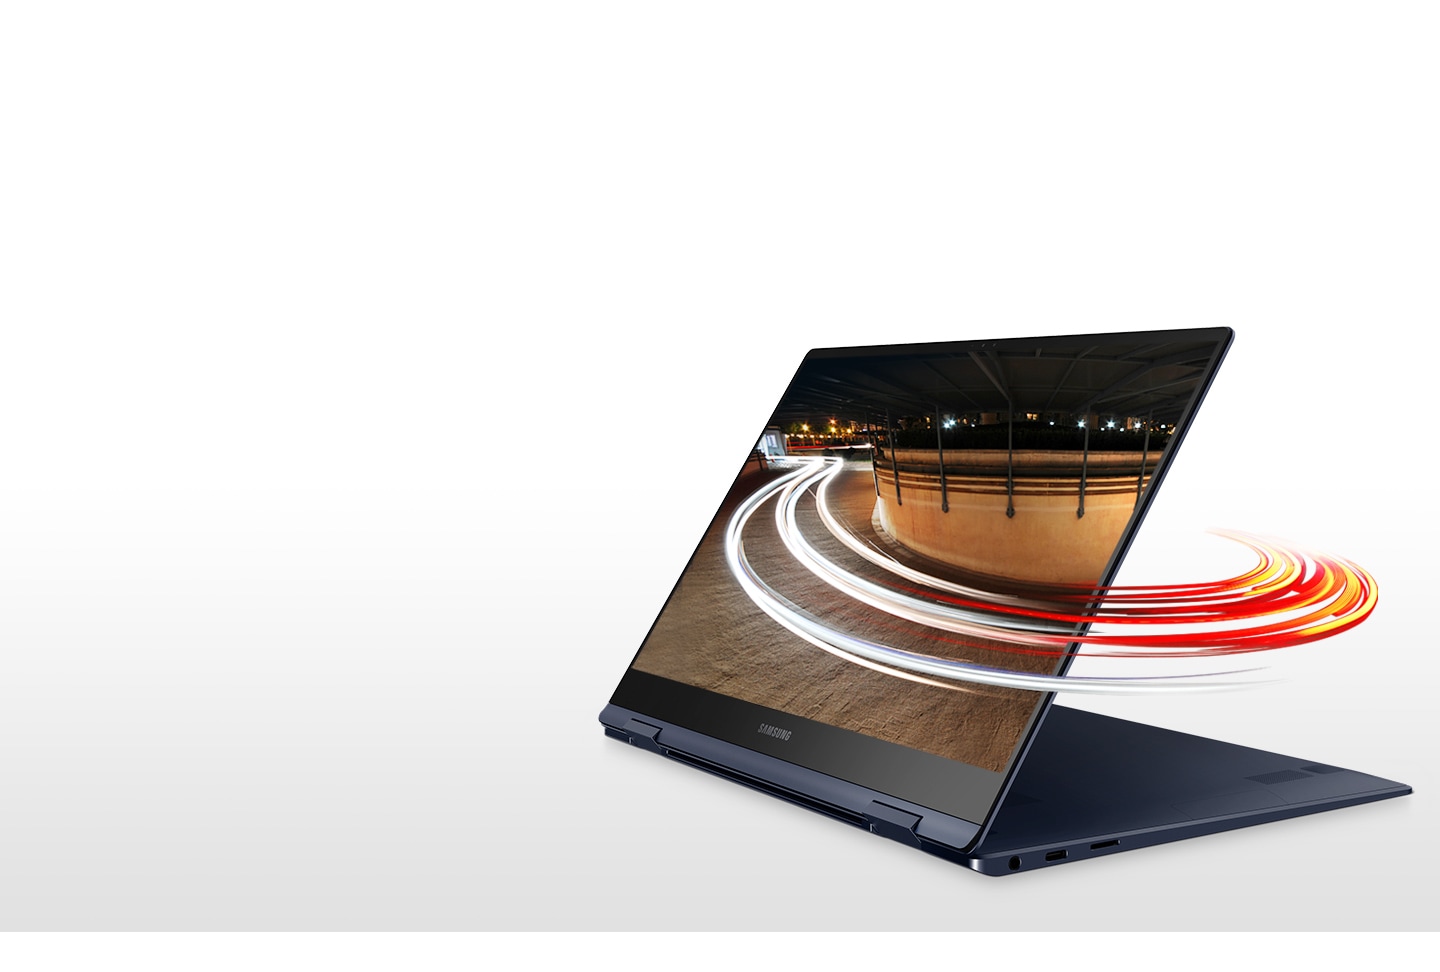 Laptop set like a tablet in a folio stand has light swirls encircling its screen, signifying the fast connectivity enabled by the Galaxy Book Pro 360.